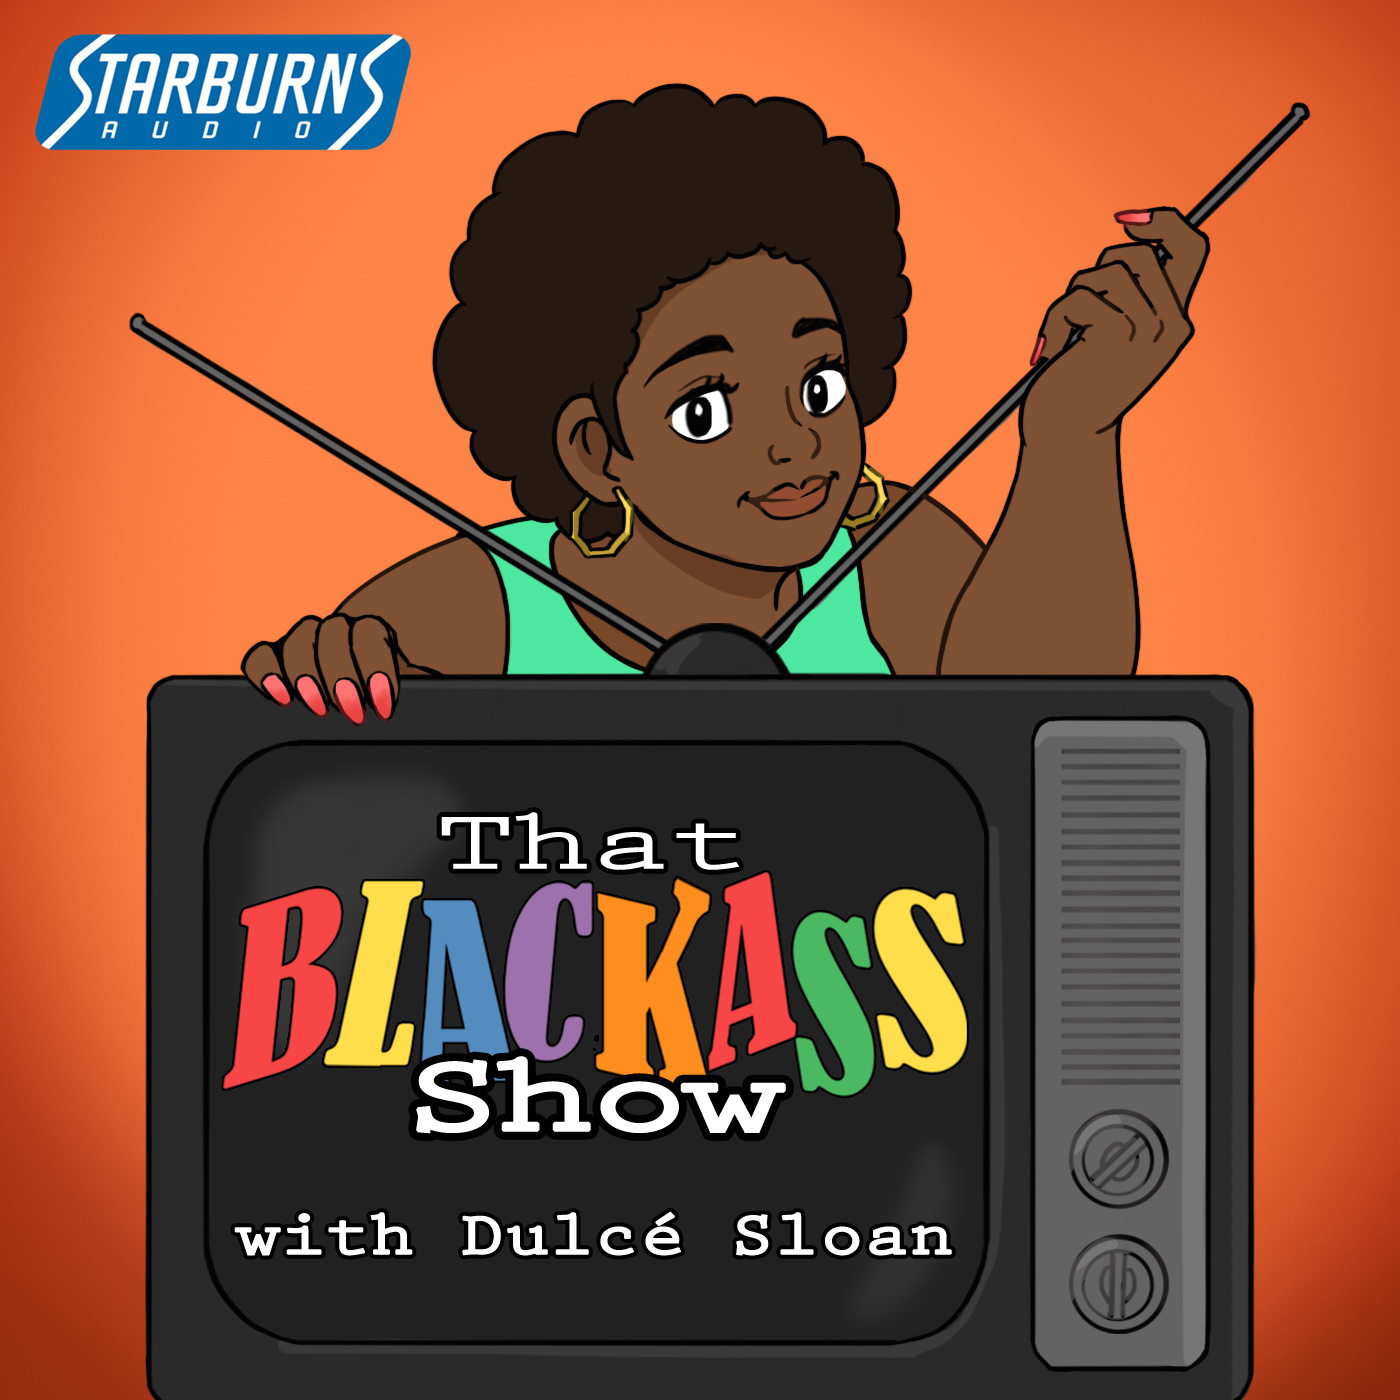 That Blackass Show Podcast Cover - Square